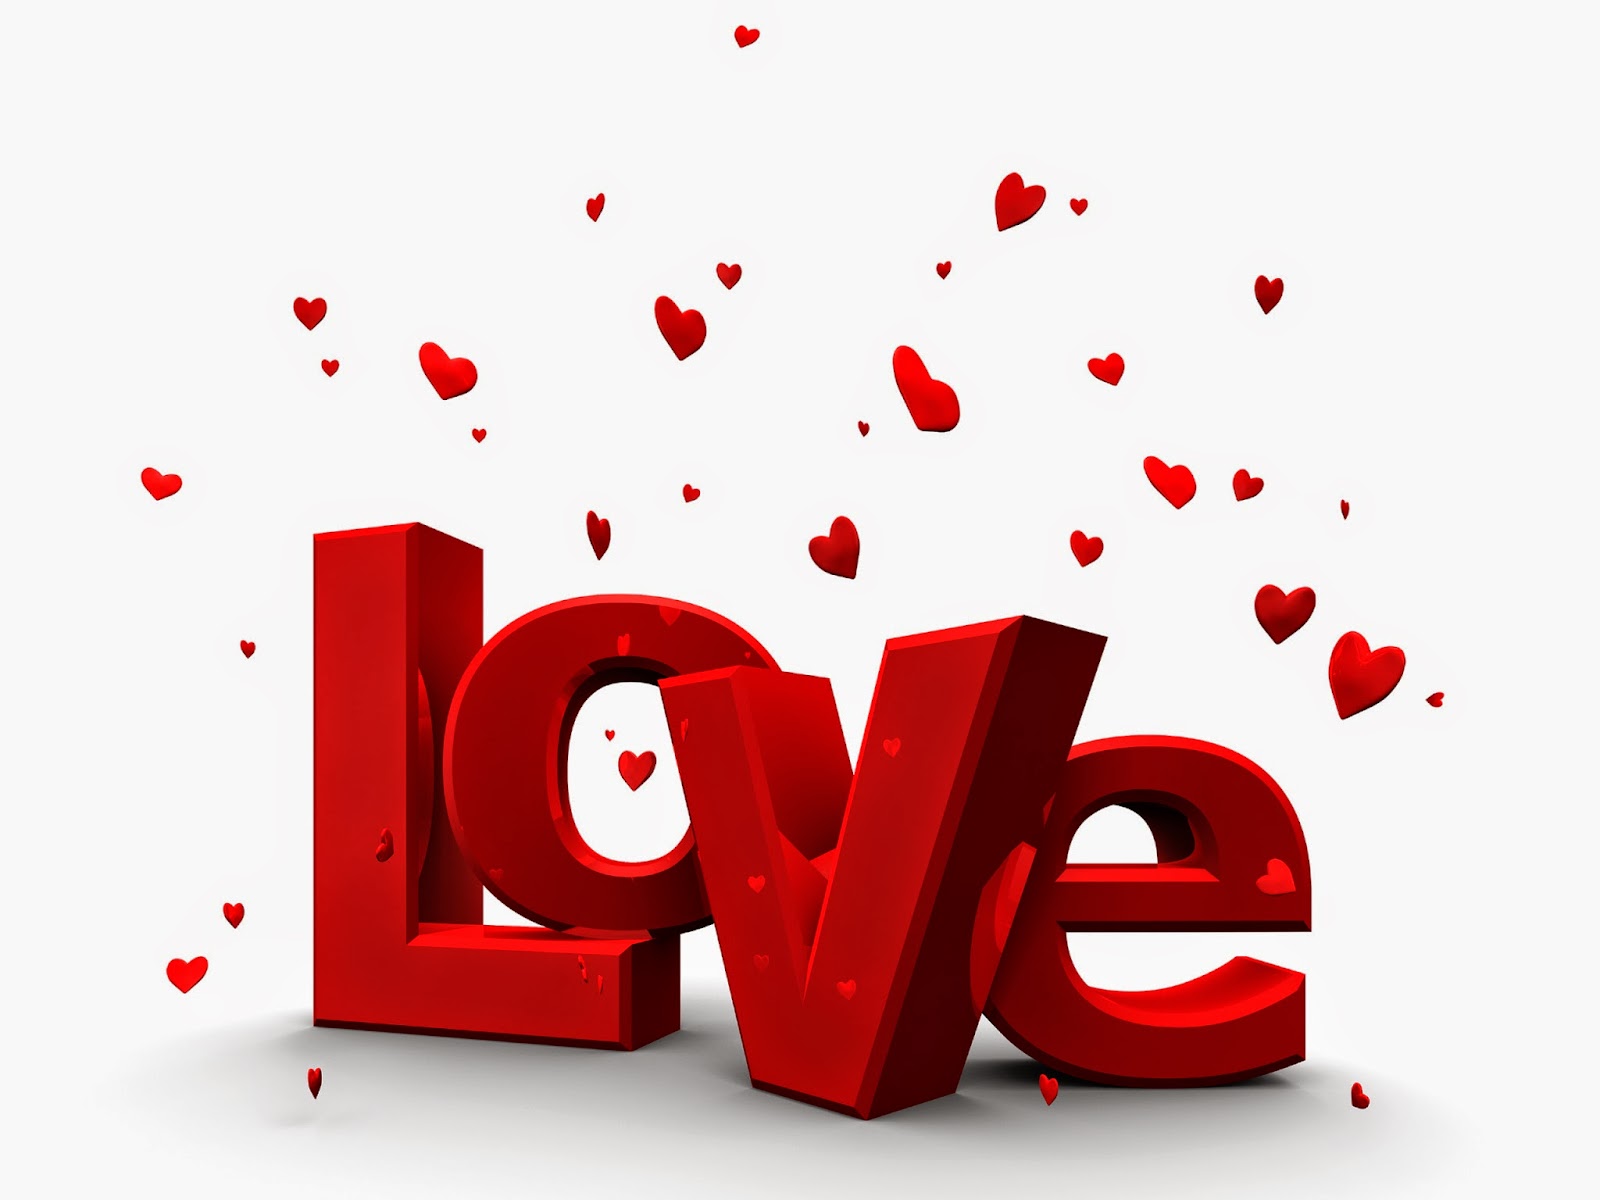 3-D illustration of the word "Love", with little red hearts